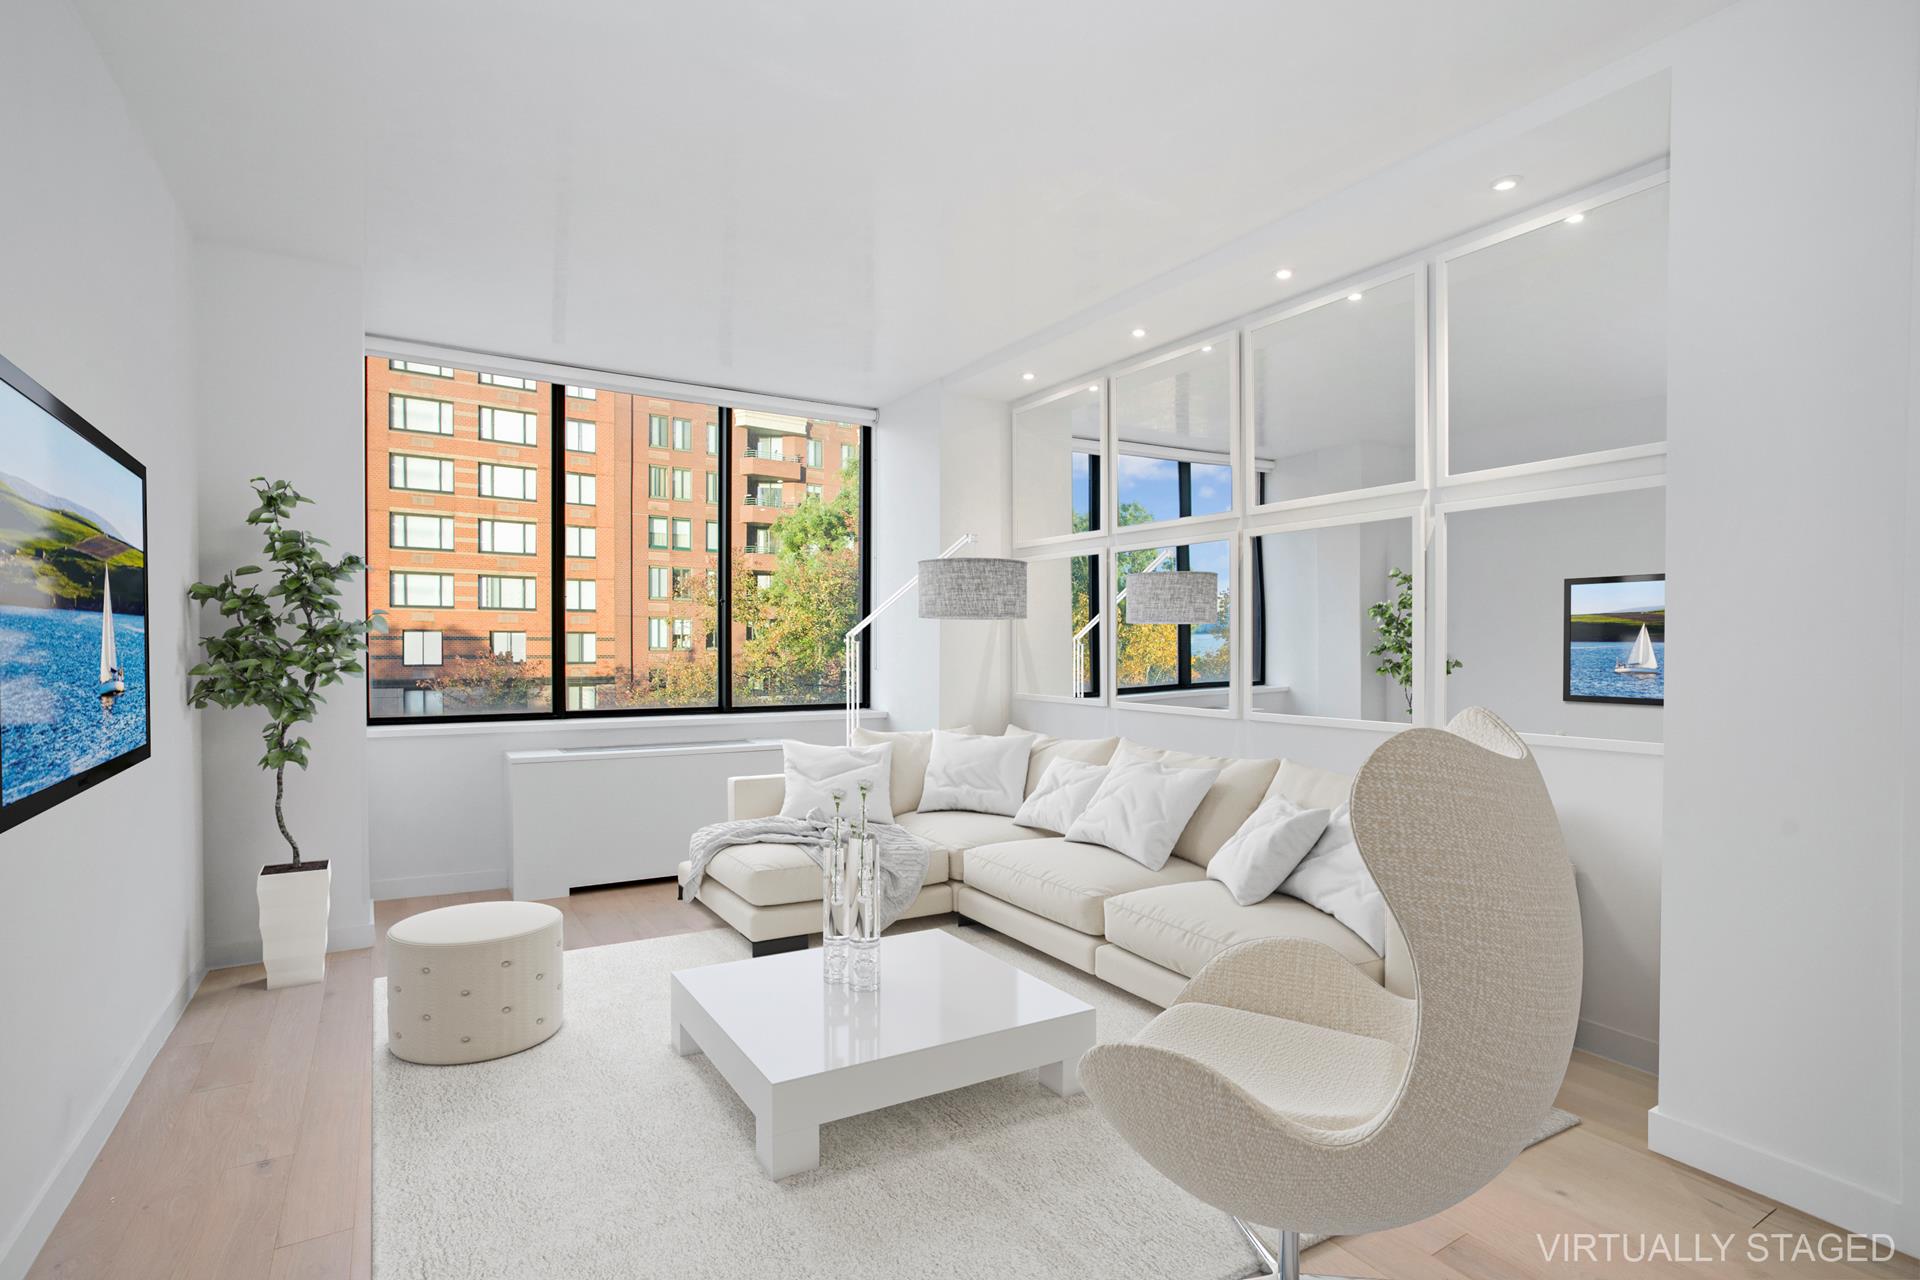 380 Rector Place 3B, Battery Park City, Downtown, NYC - 2 Bedrooms  
2 Bathrooms  
4 Rooms - 